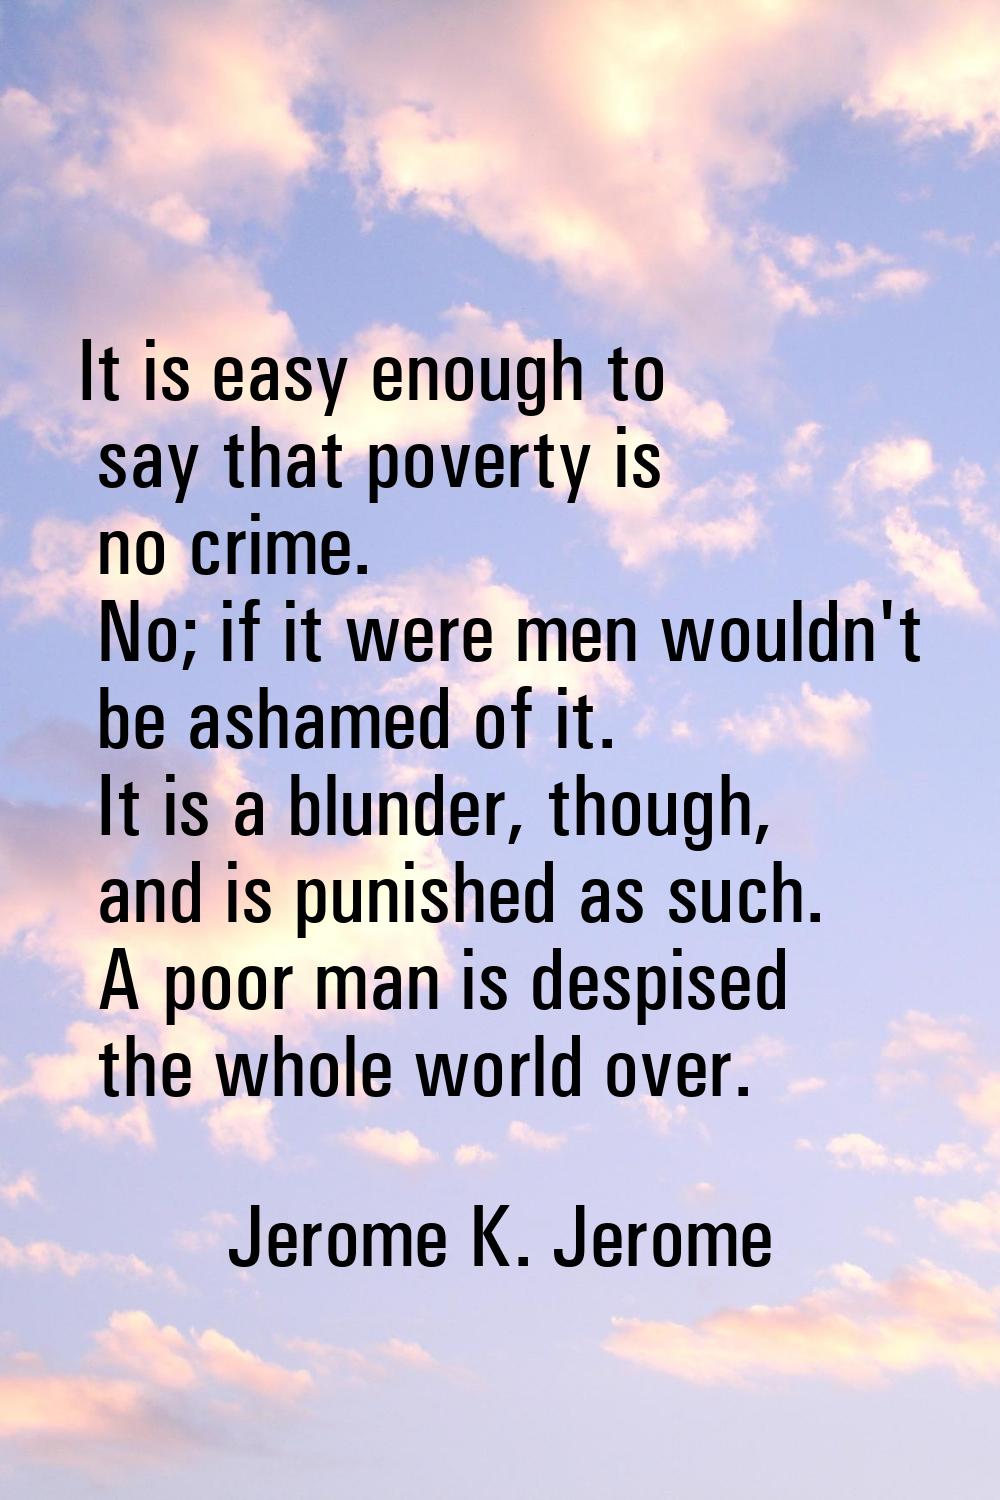 It is easy enough to say that poverty is no crime. No; if it were men wouldn't be ashamed of it. It